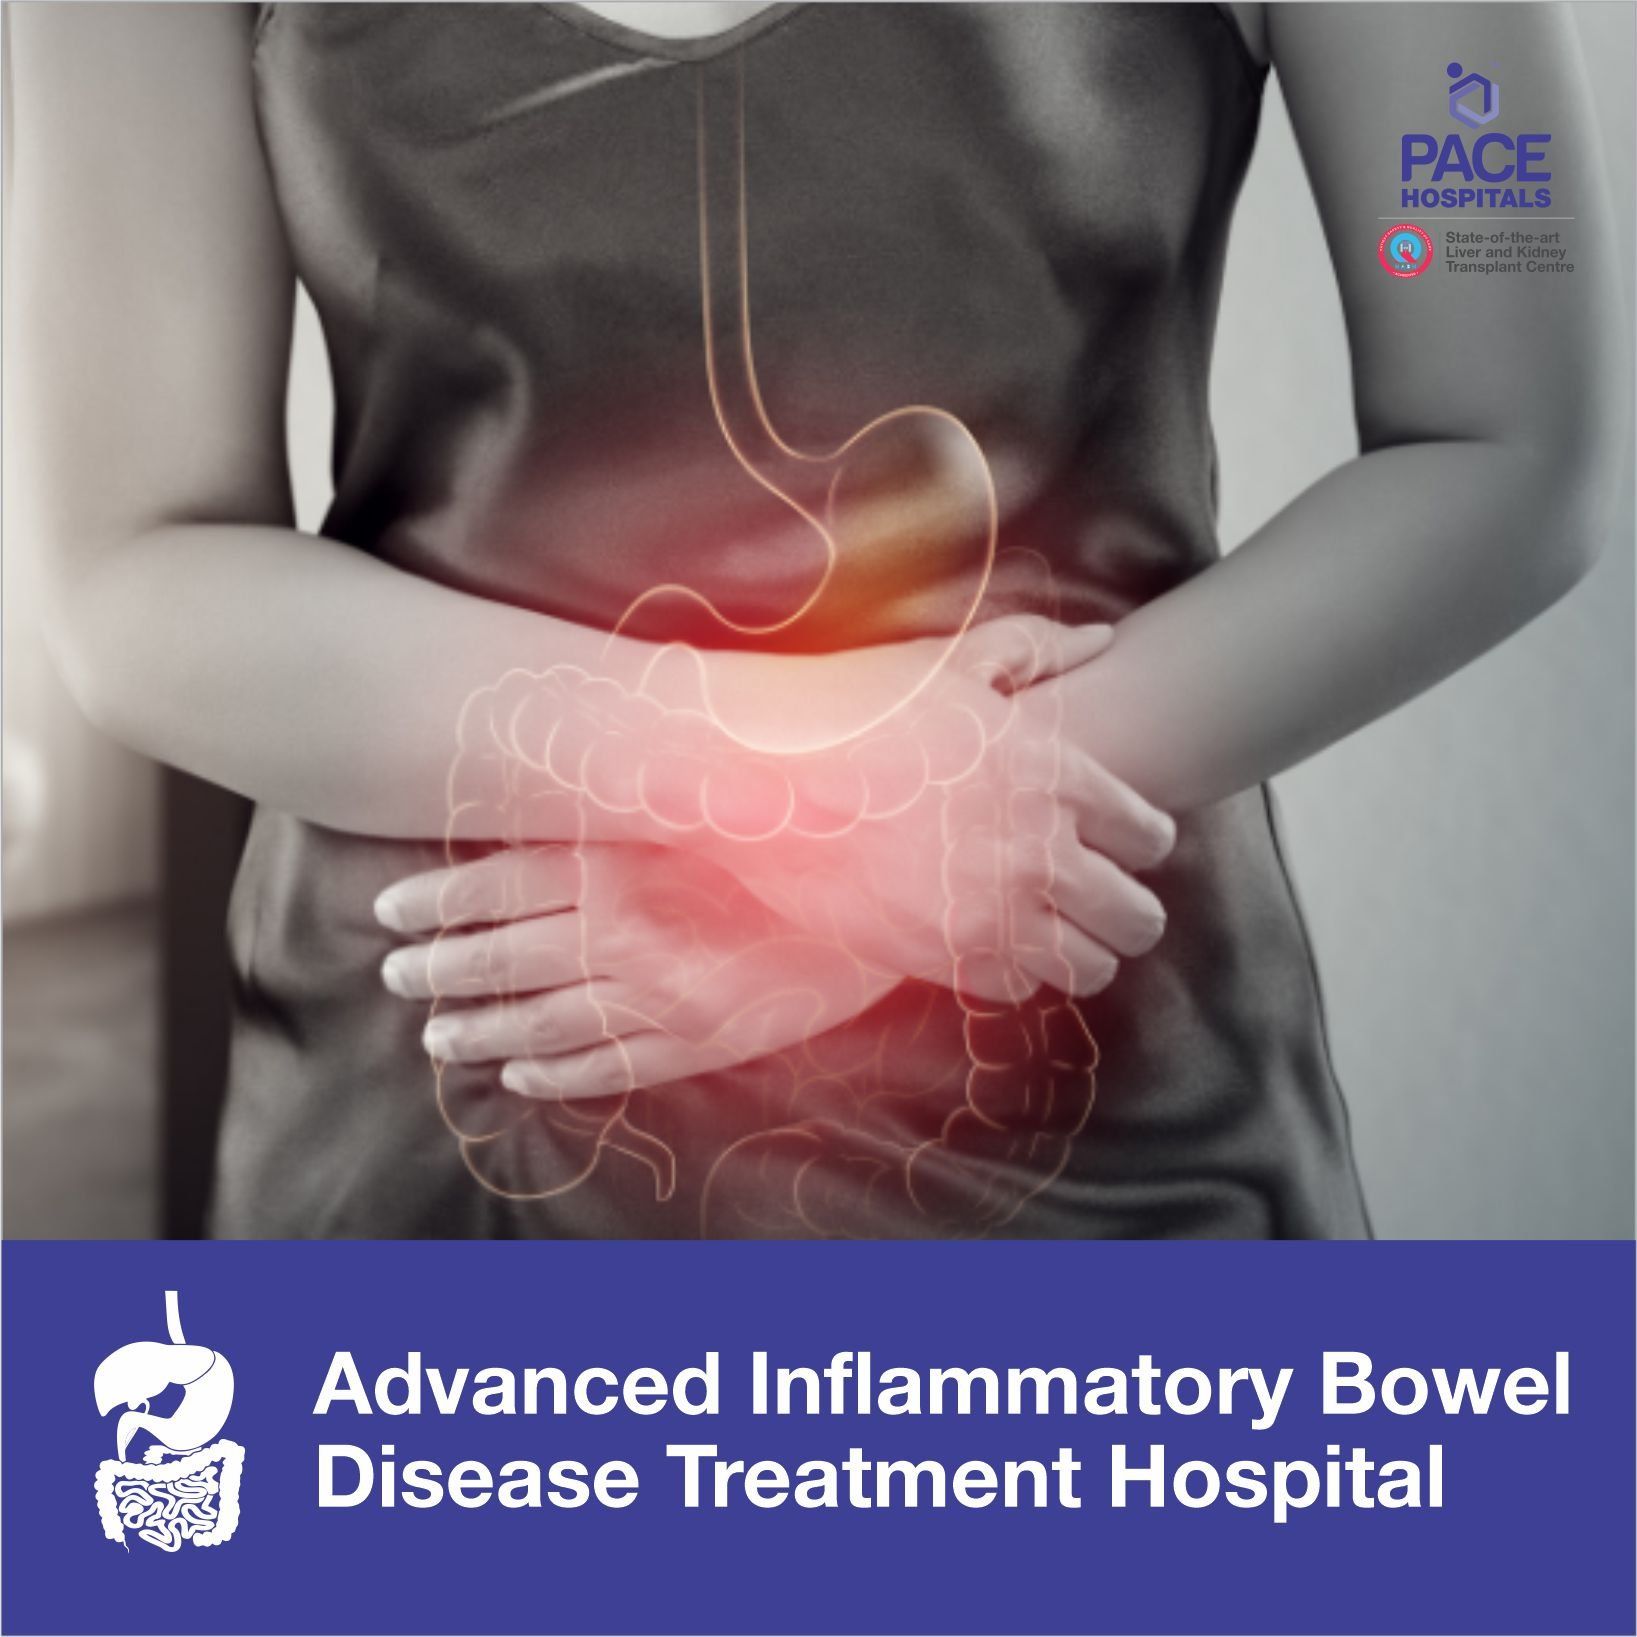 Advanced Inflammatory Bowel Disease (Ulcerative colitis and Crohn's disease) Treatment Hospital in Hyderabad | Pace Hospitals